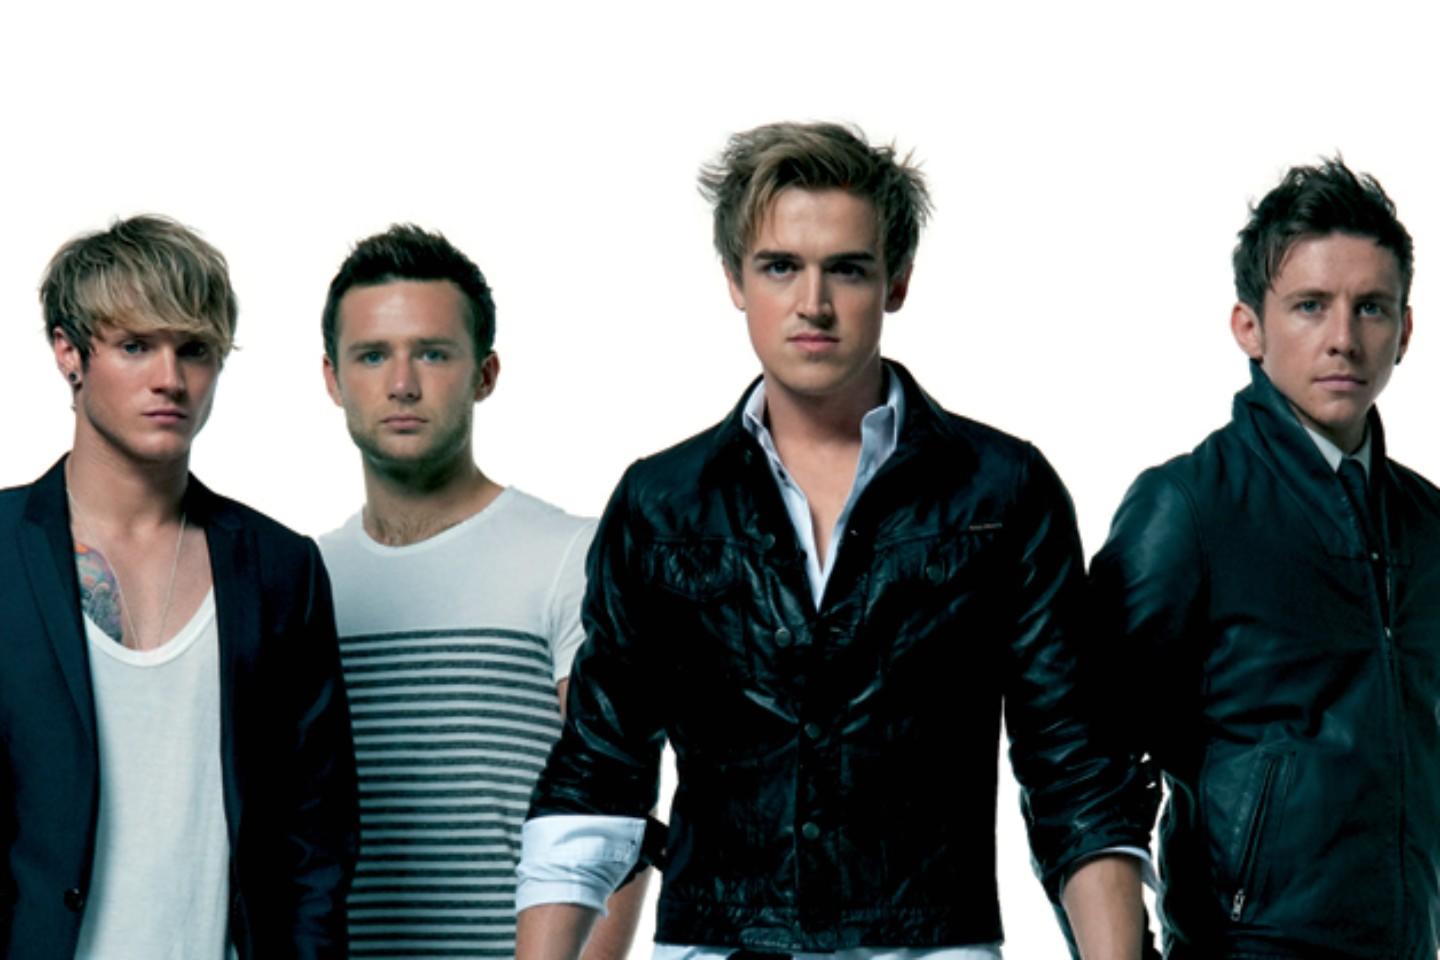 McFly Tickets | McFly Tour and Concert Tickets - viagogo1440 x 960